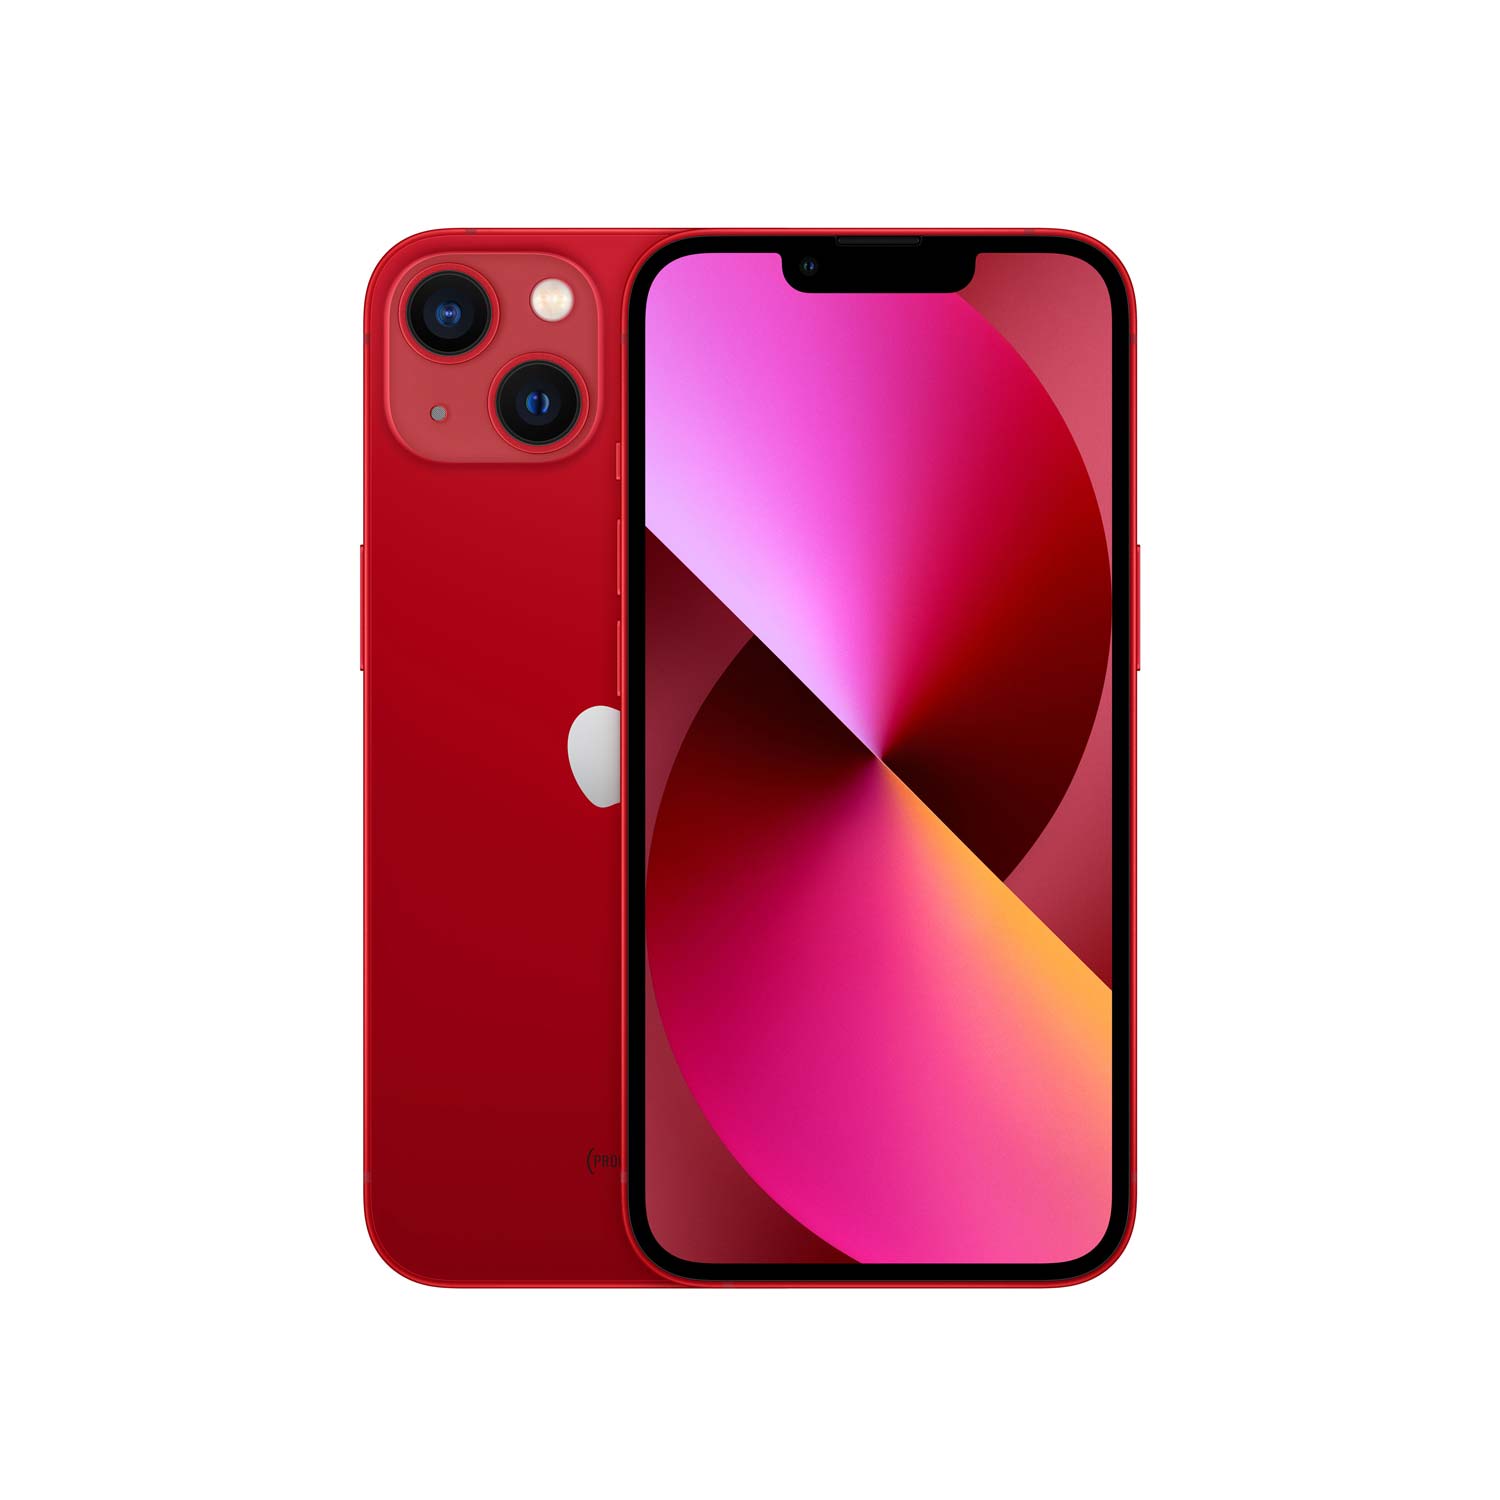 RP 1982// DEMO Apple iPhone 13 128GB - (PRODUCT)RED 